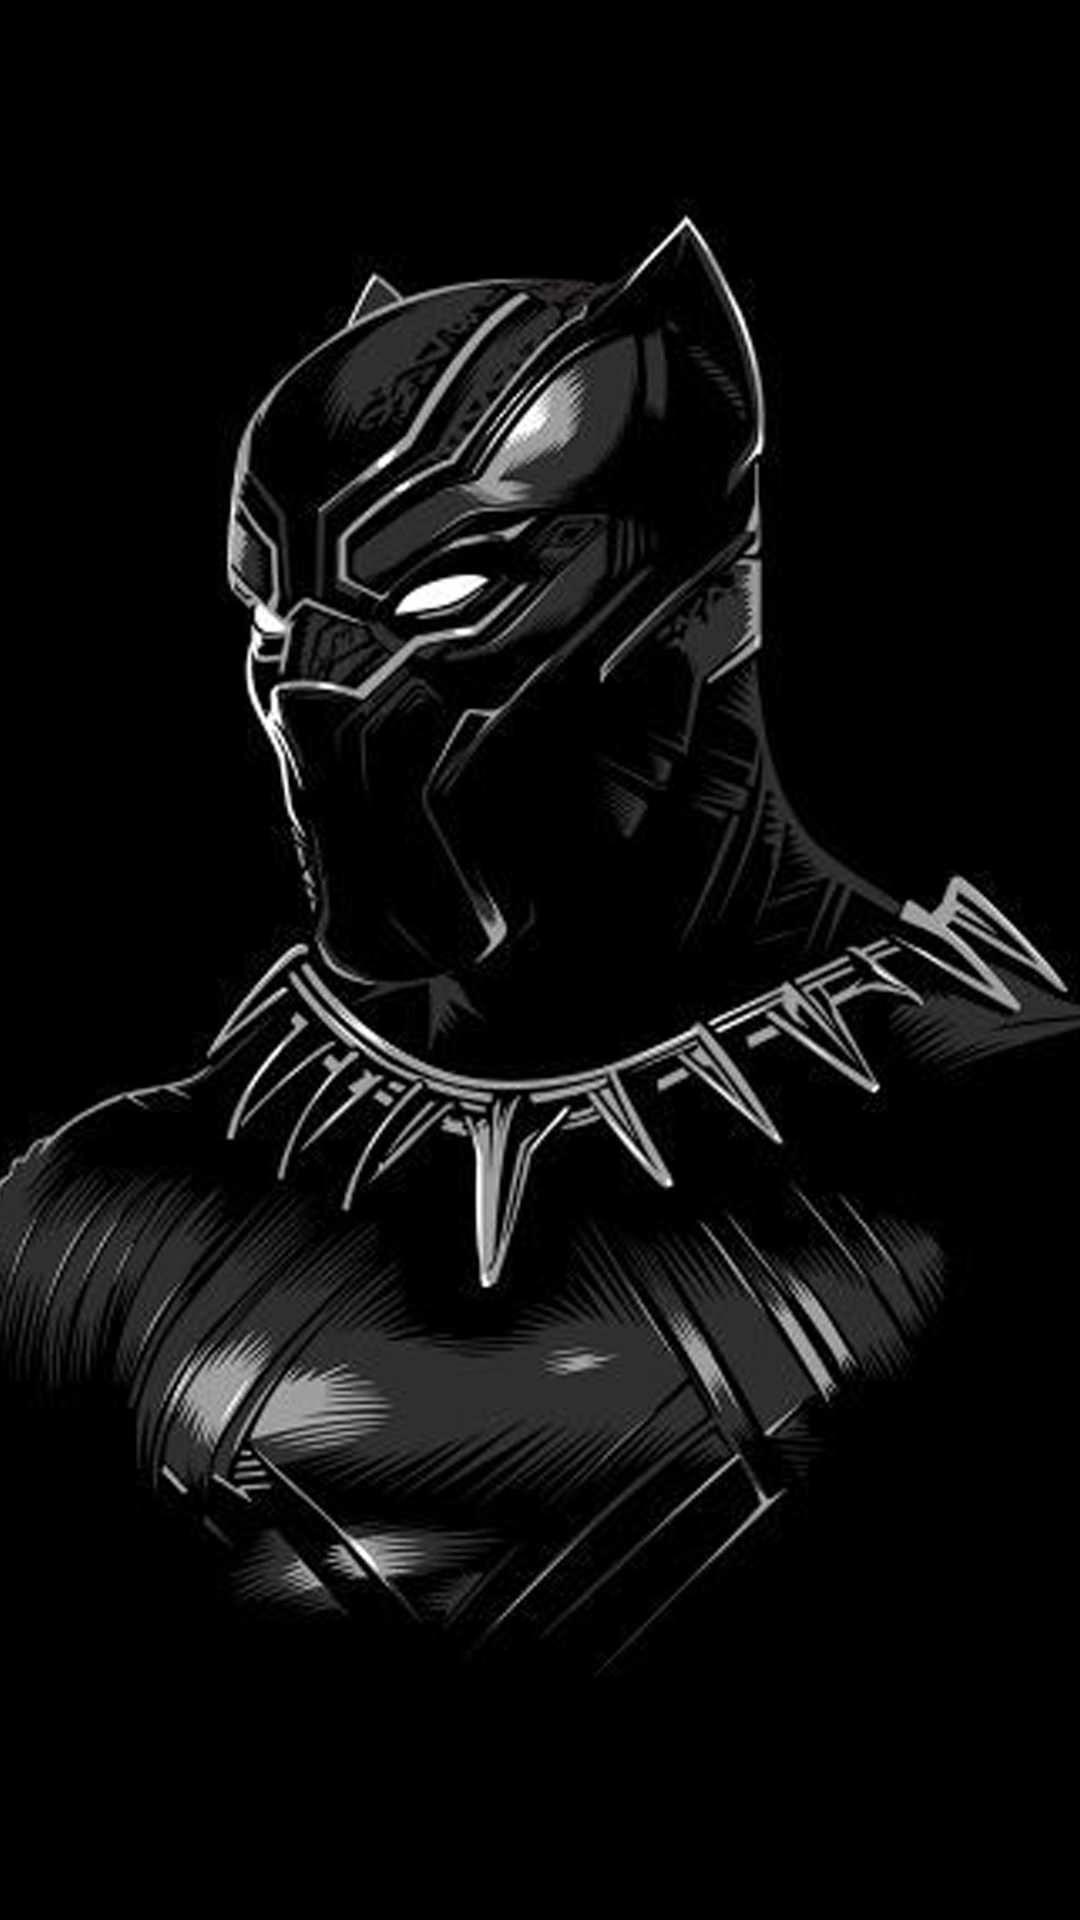 Stunning iPhone wallpapers, Marvel's black panther, Phone backgrounds, Cinematic excellence, 1080x1920 Full HD Phone